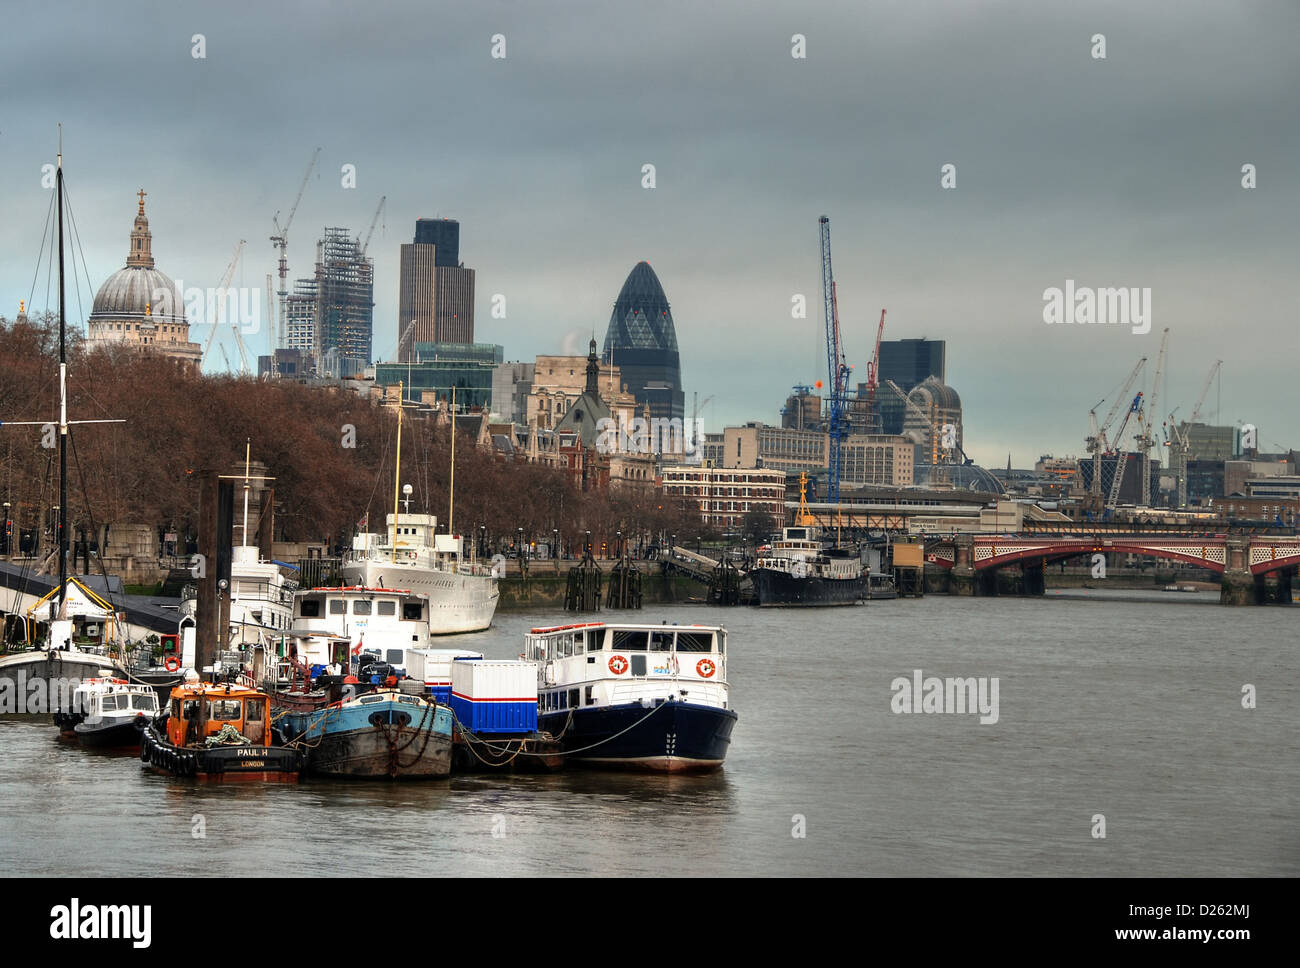 The City of London, seen behind boats on the River Thames Stock Photo